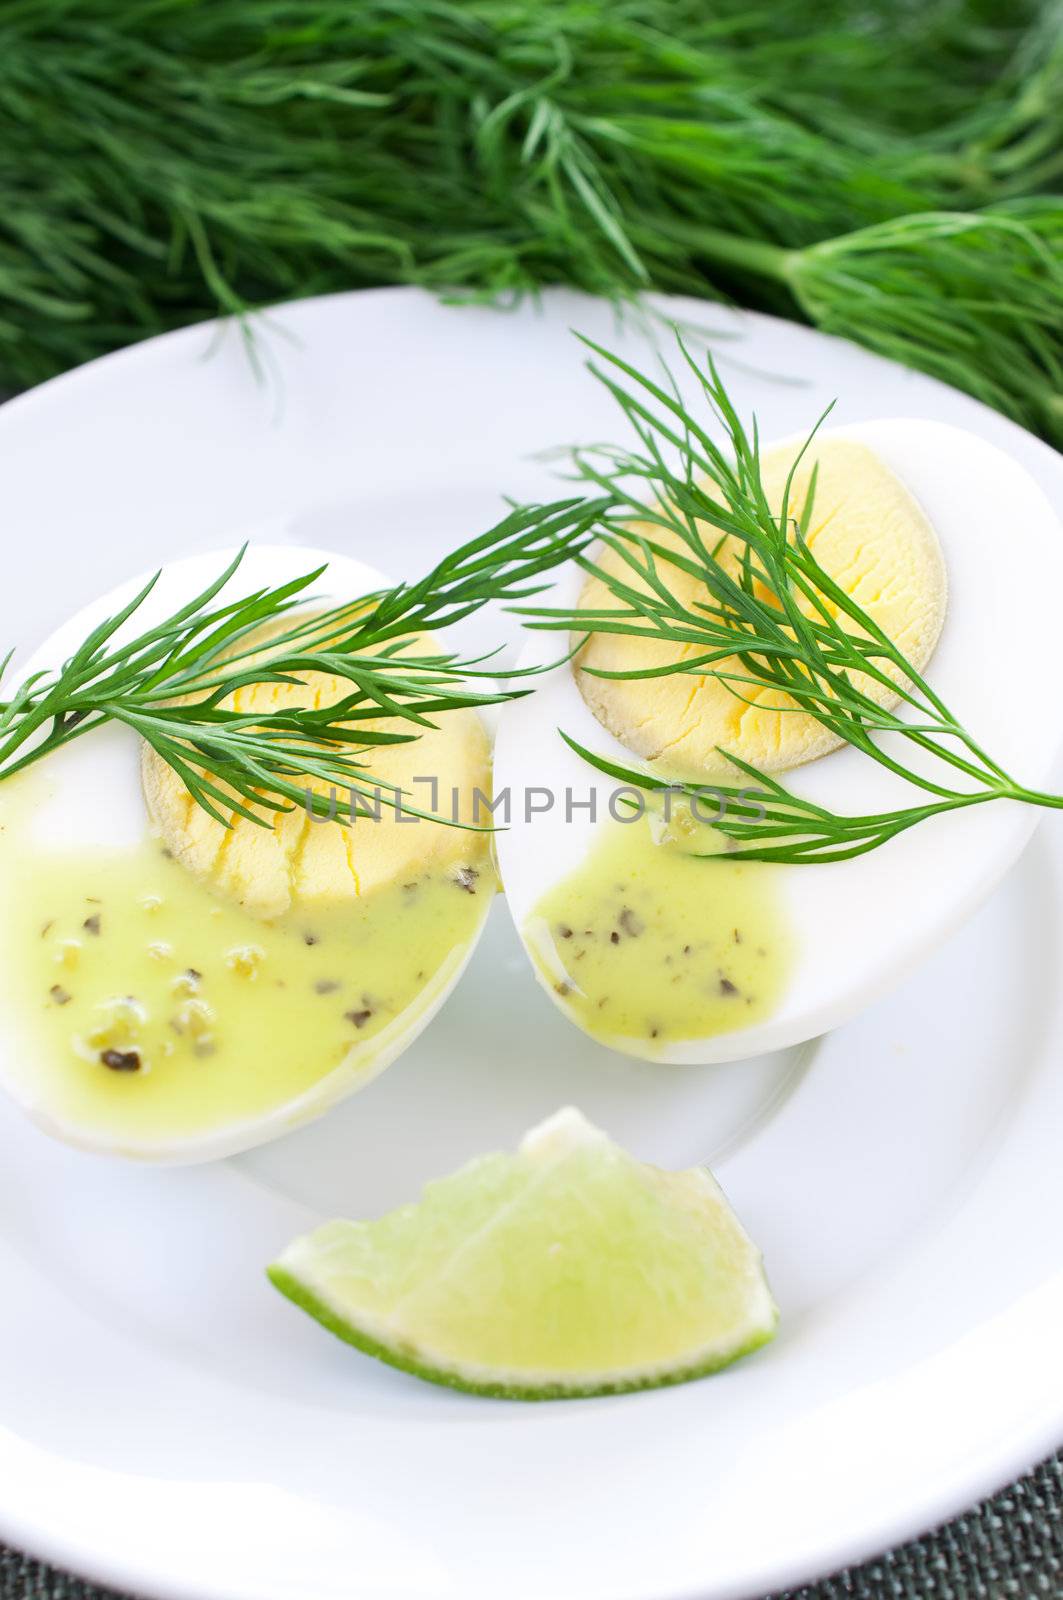 Chicken egg cut in half on dill background by Nanisimova